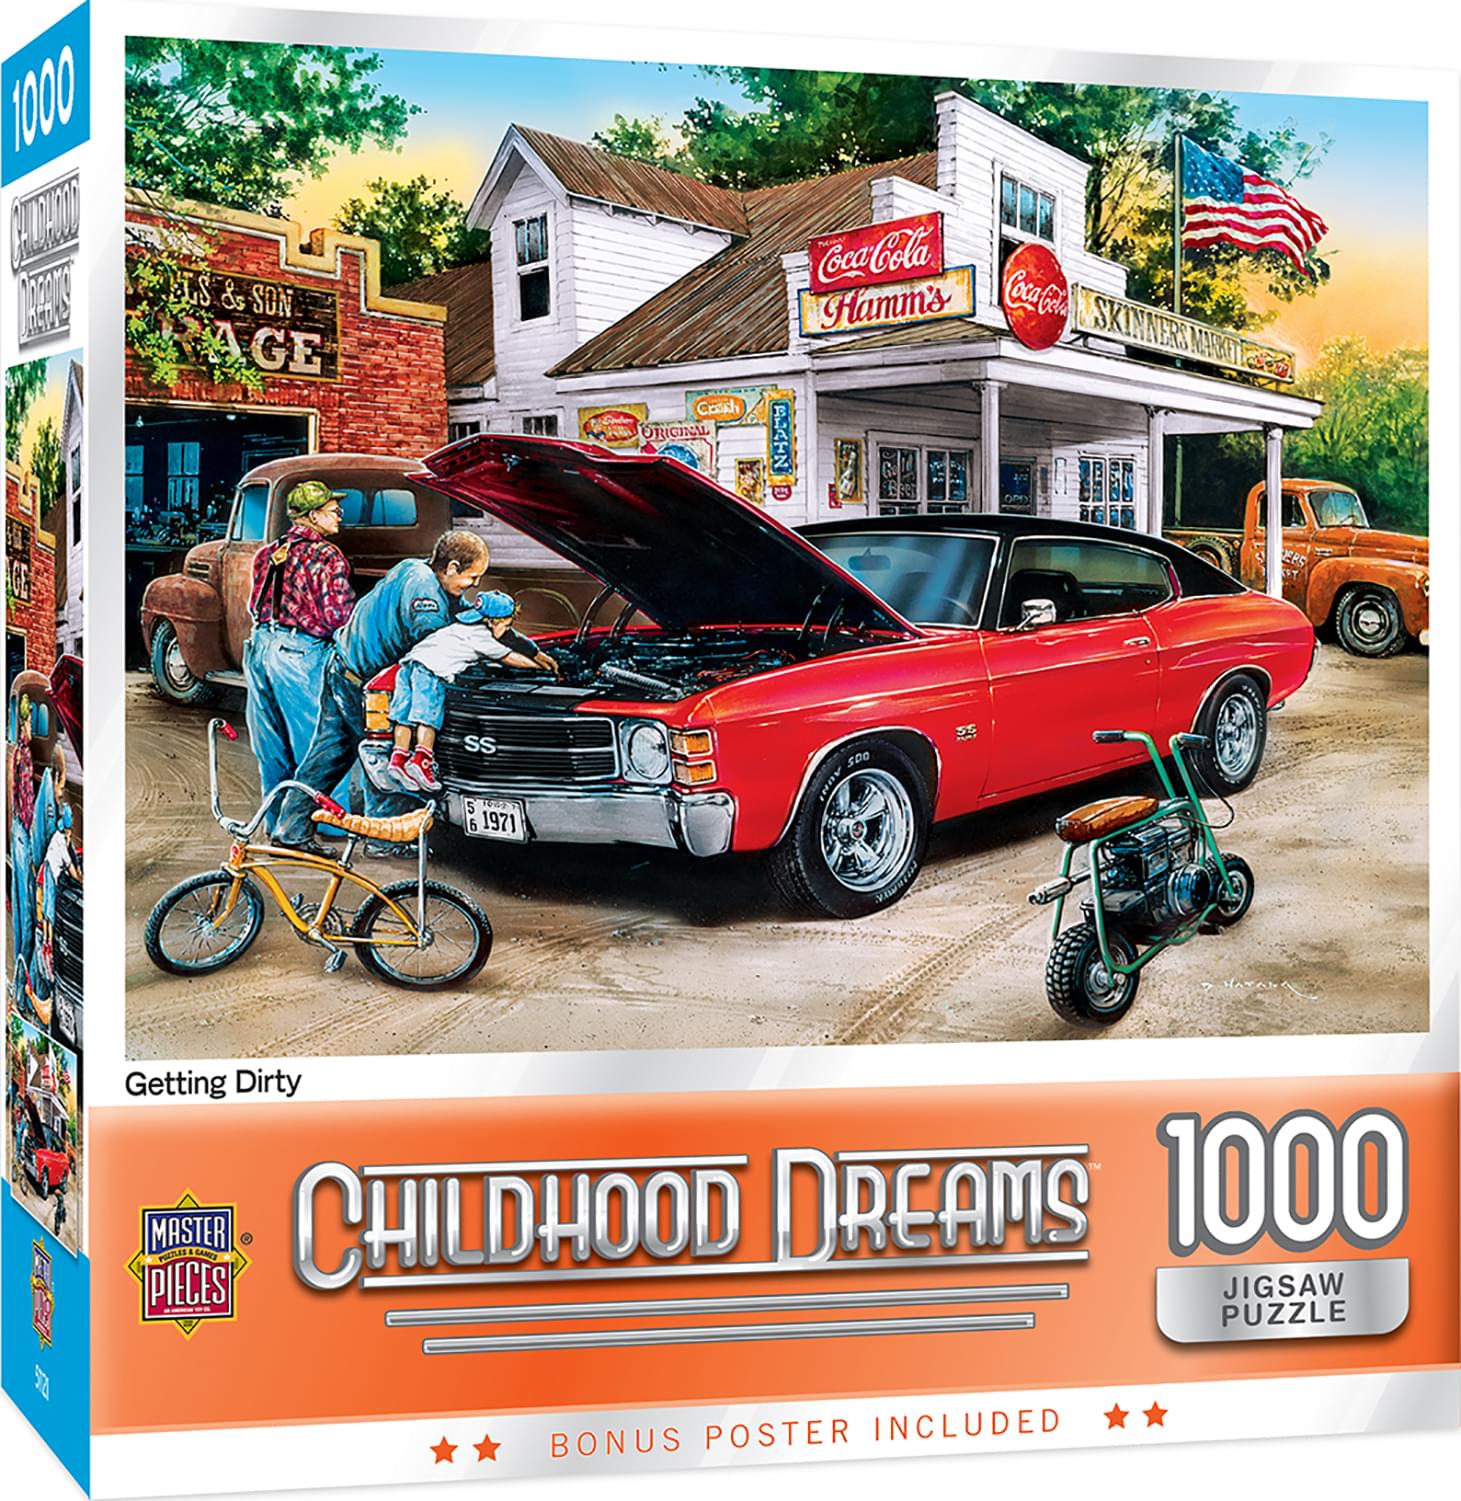 Childhood Dreams Getting Dirty 1000 Piece Jigsaw Puzzle